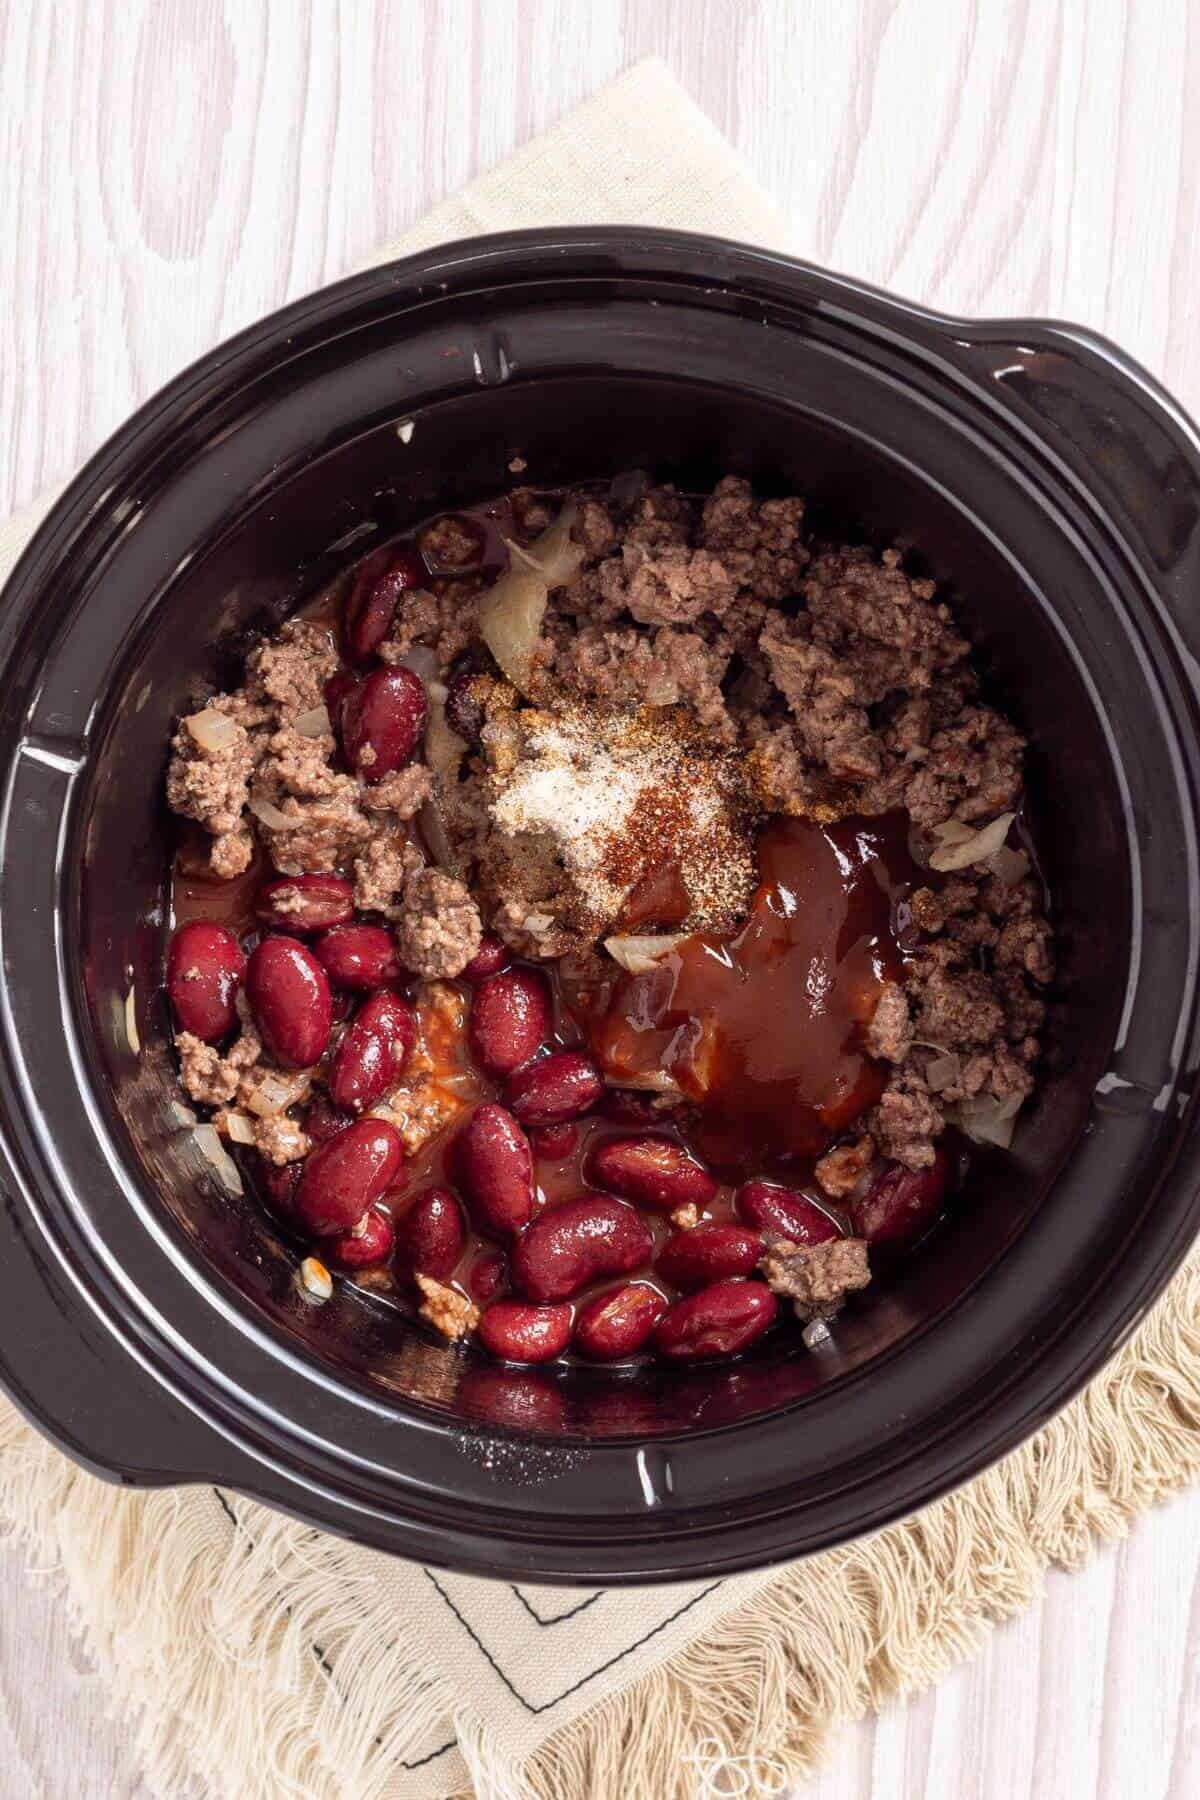 A crock pot with beans and meat.